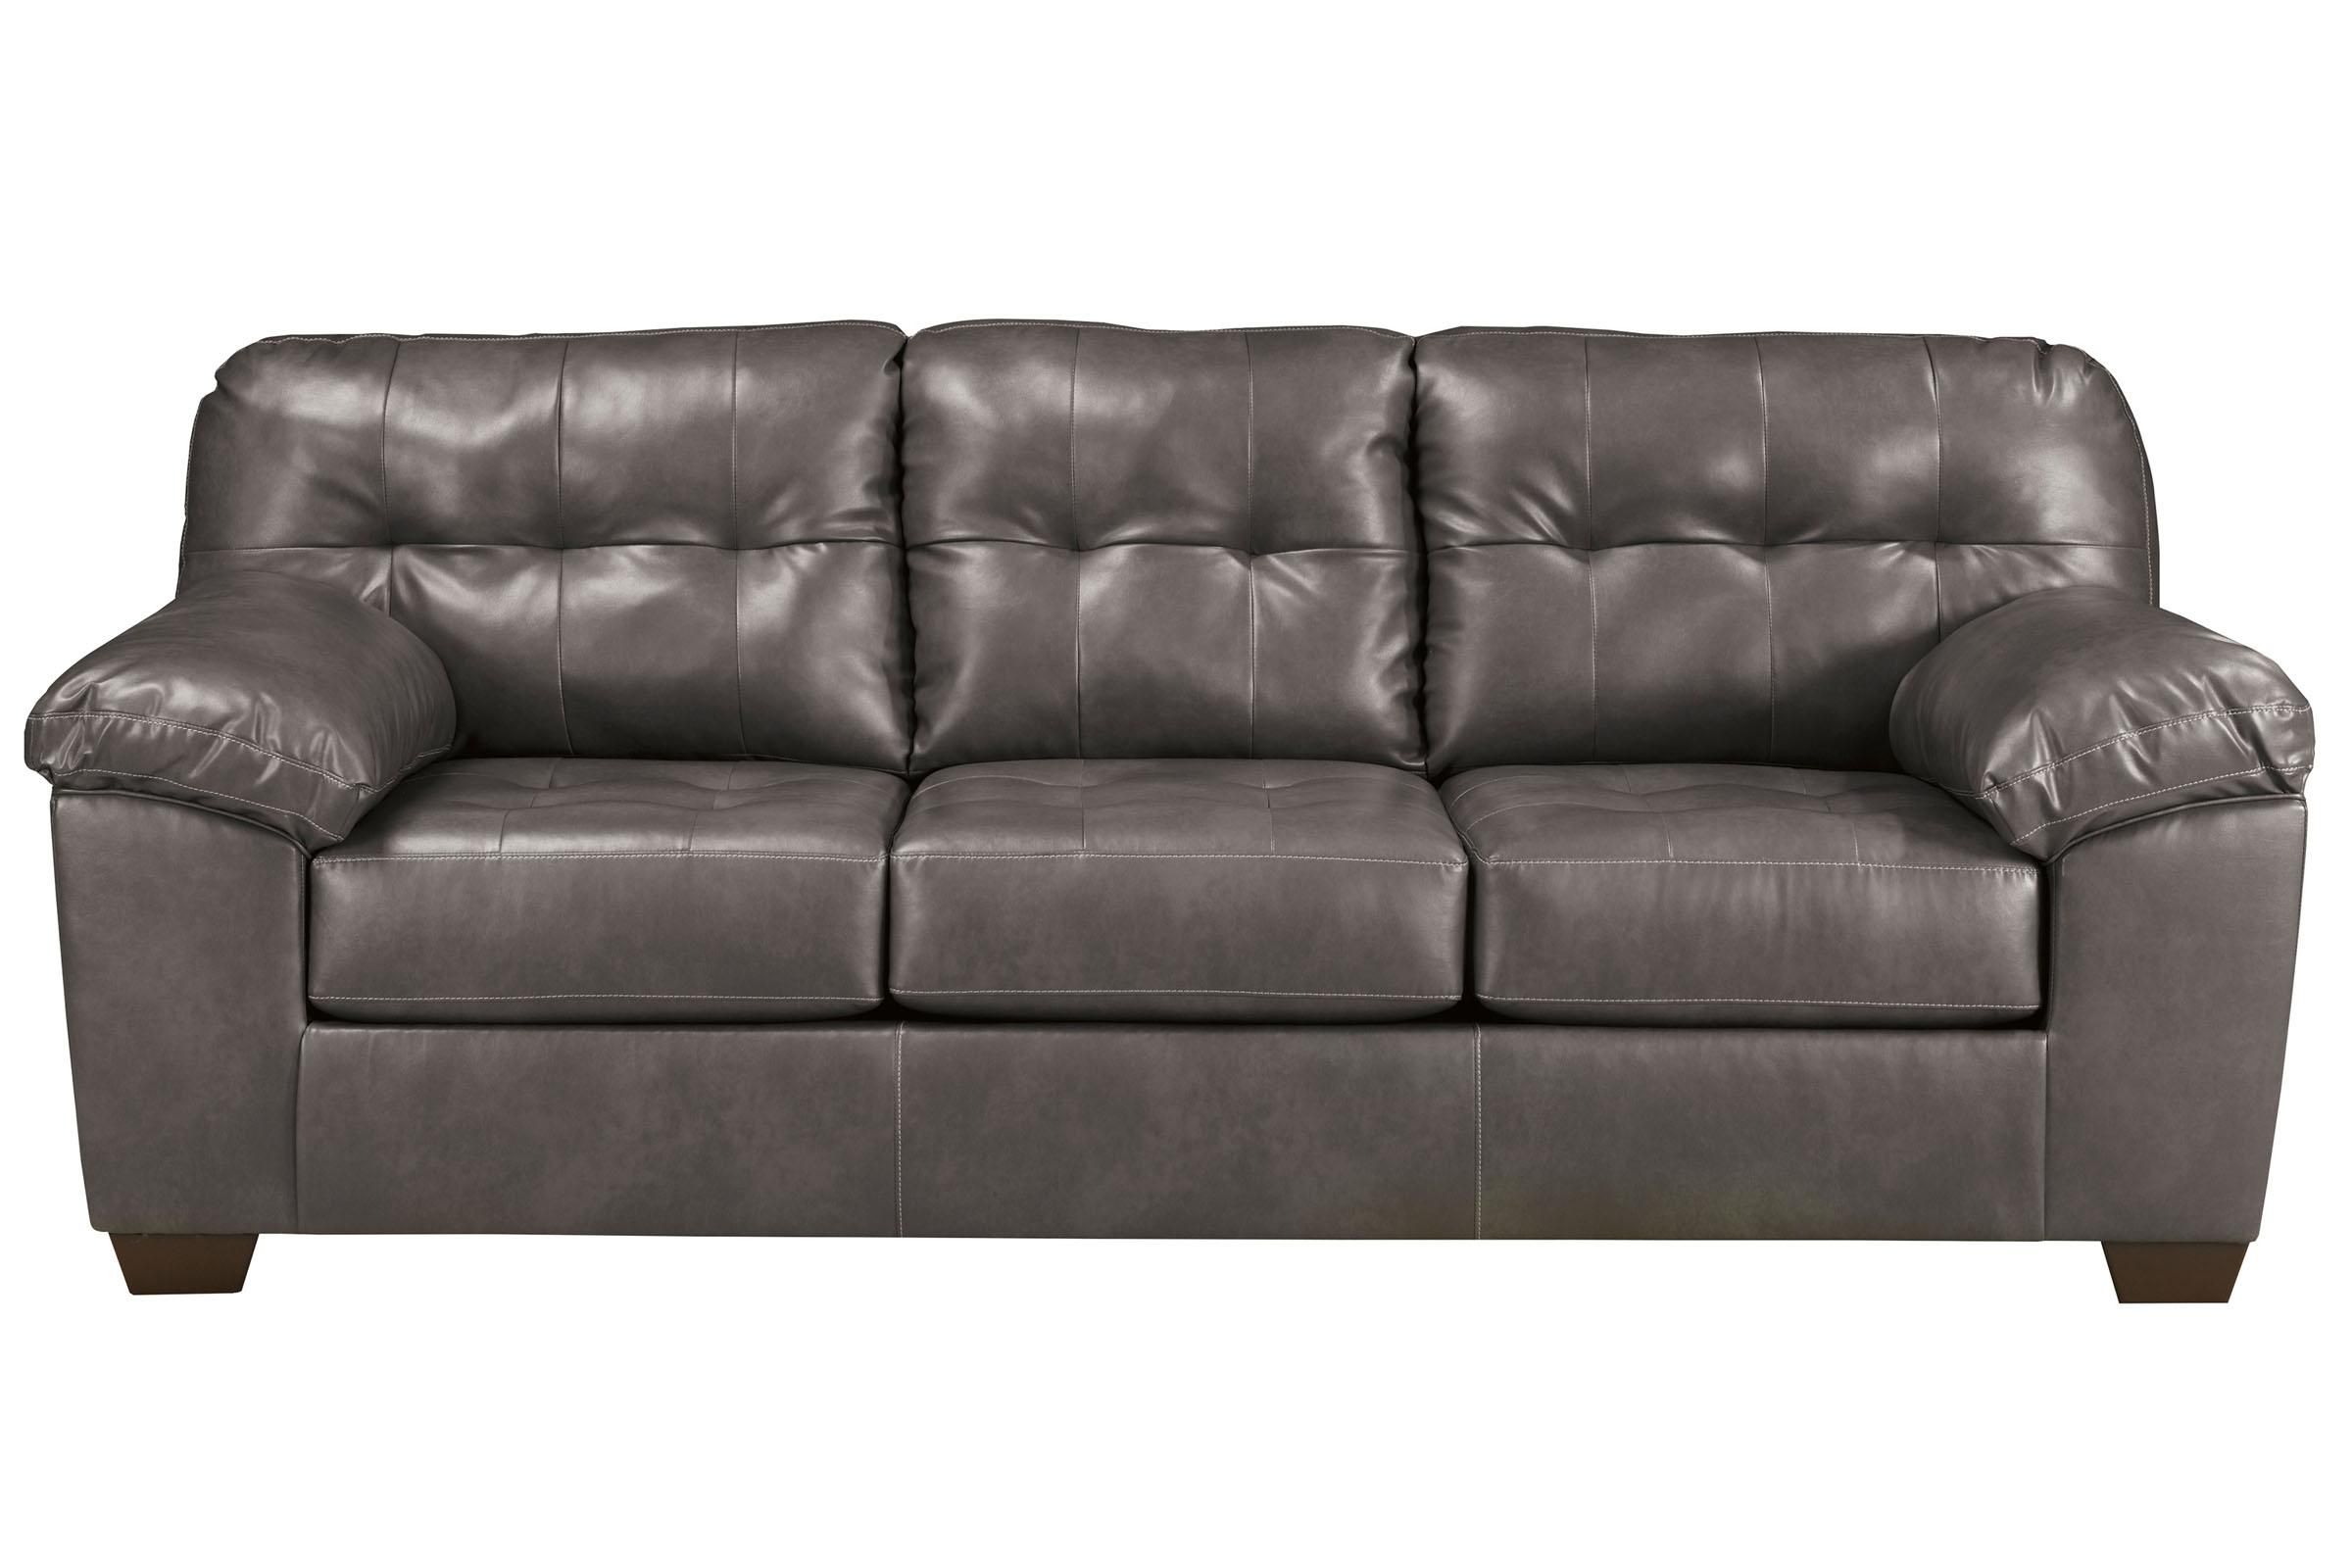 Edison Bonded Leather Sofa Within Sealy Leather Sofas (View 4 of 20)